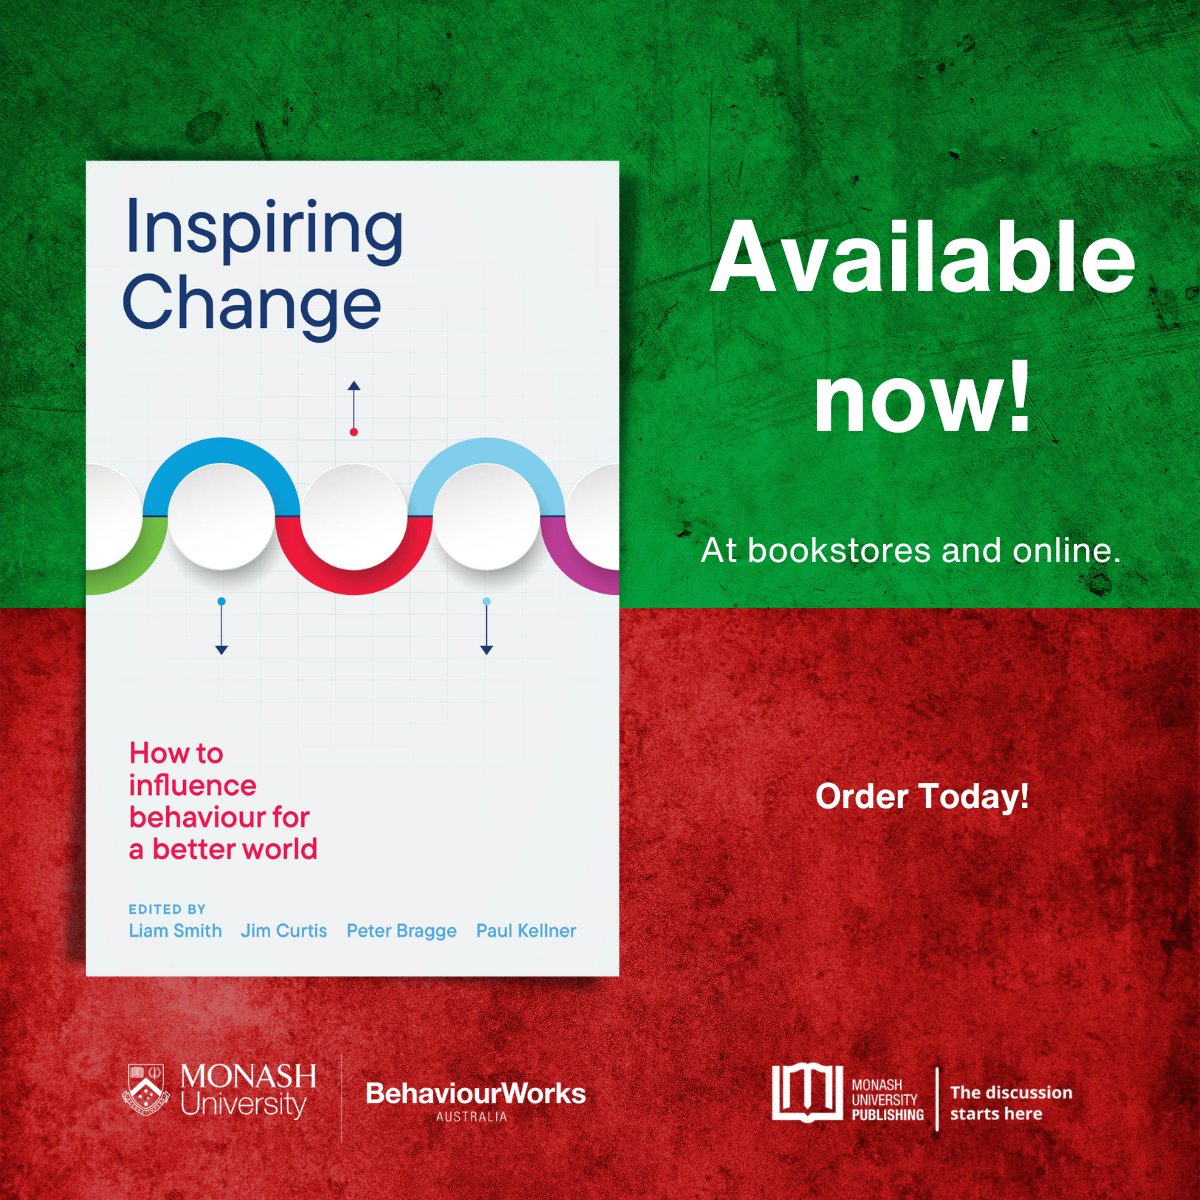 The secret is out (and so is the book)! Learn how we have successfully influenced behaviour for good, in our book Inspiring Change! Order today: publishing.monash.edu/product/inspir… @MonashPub